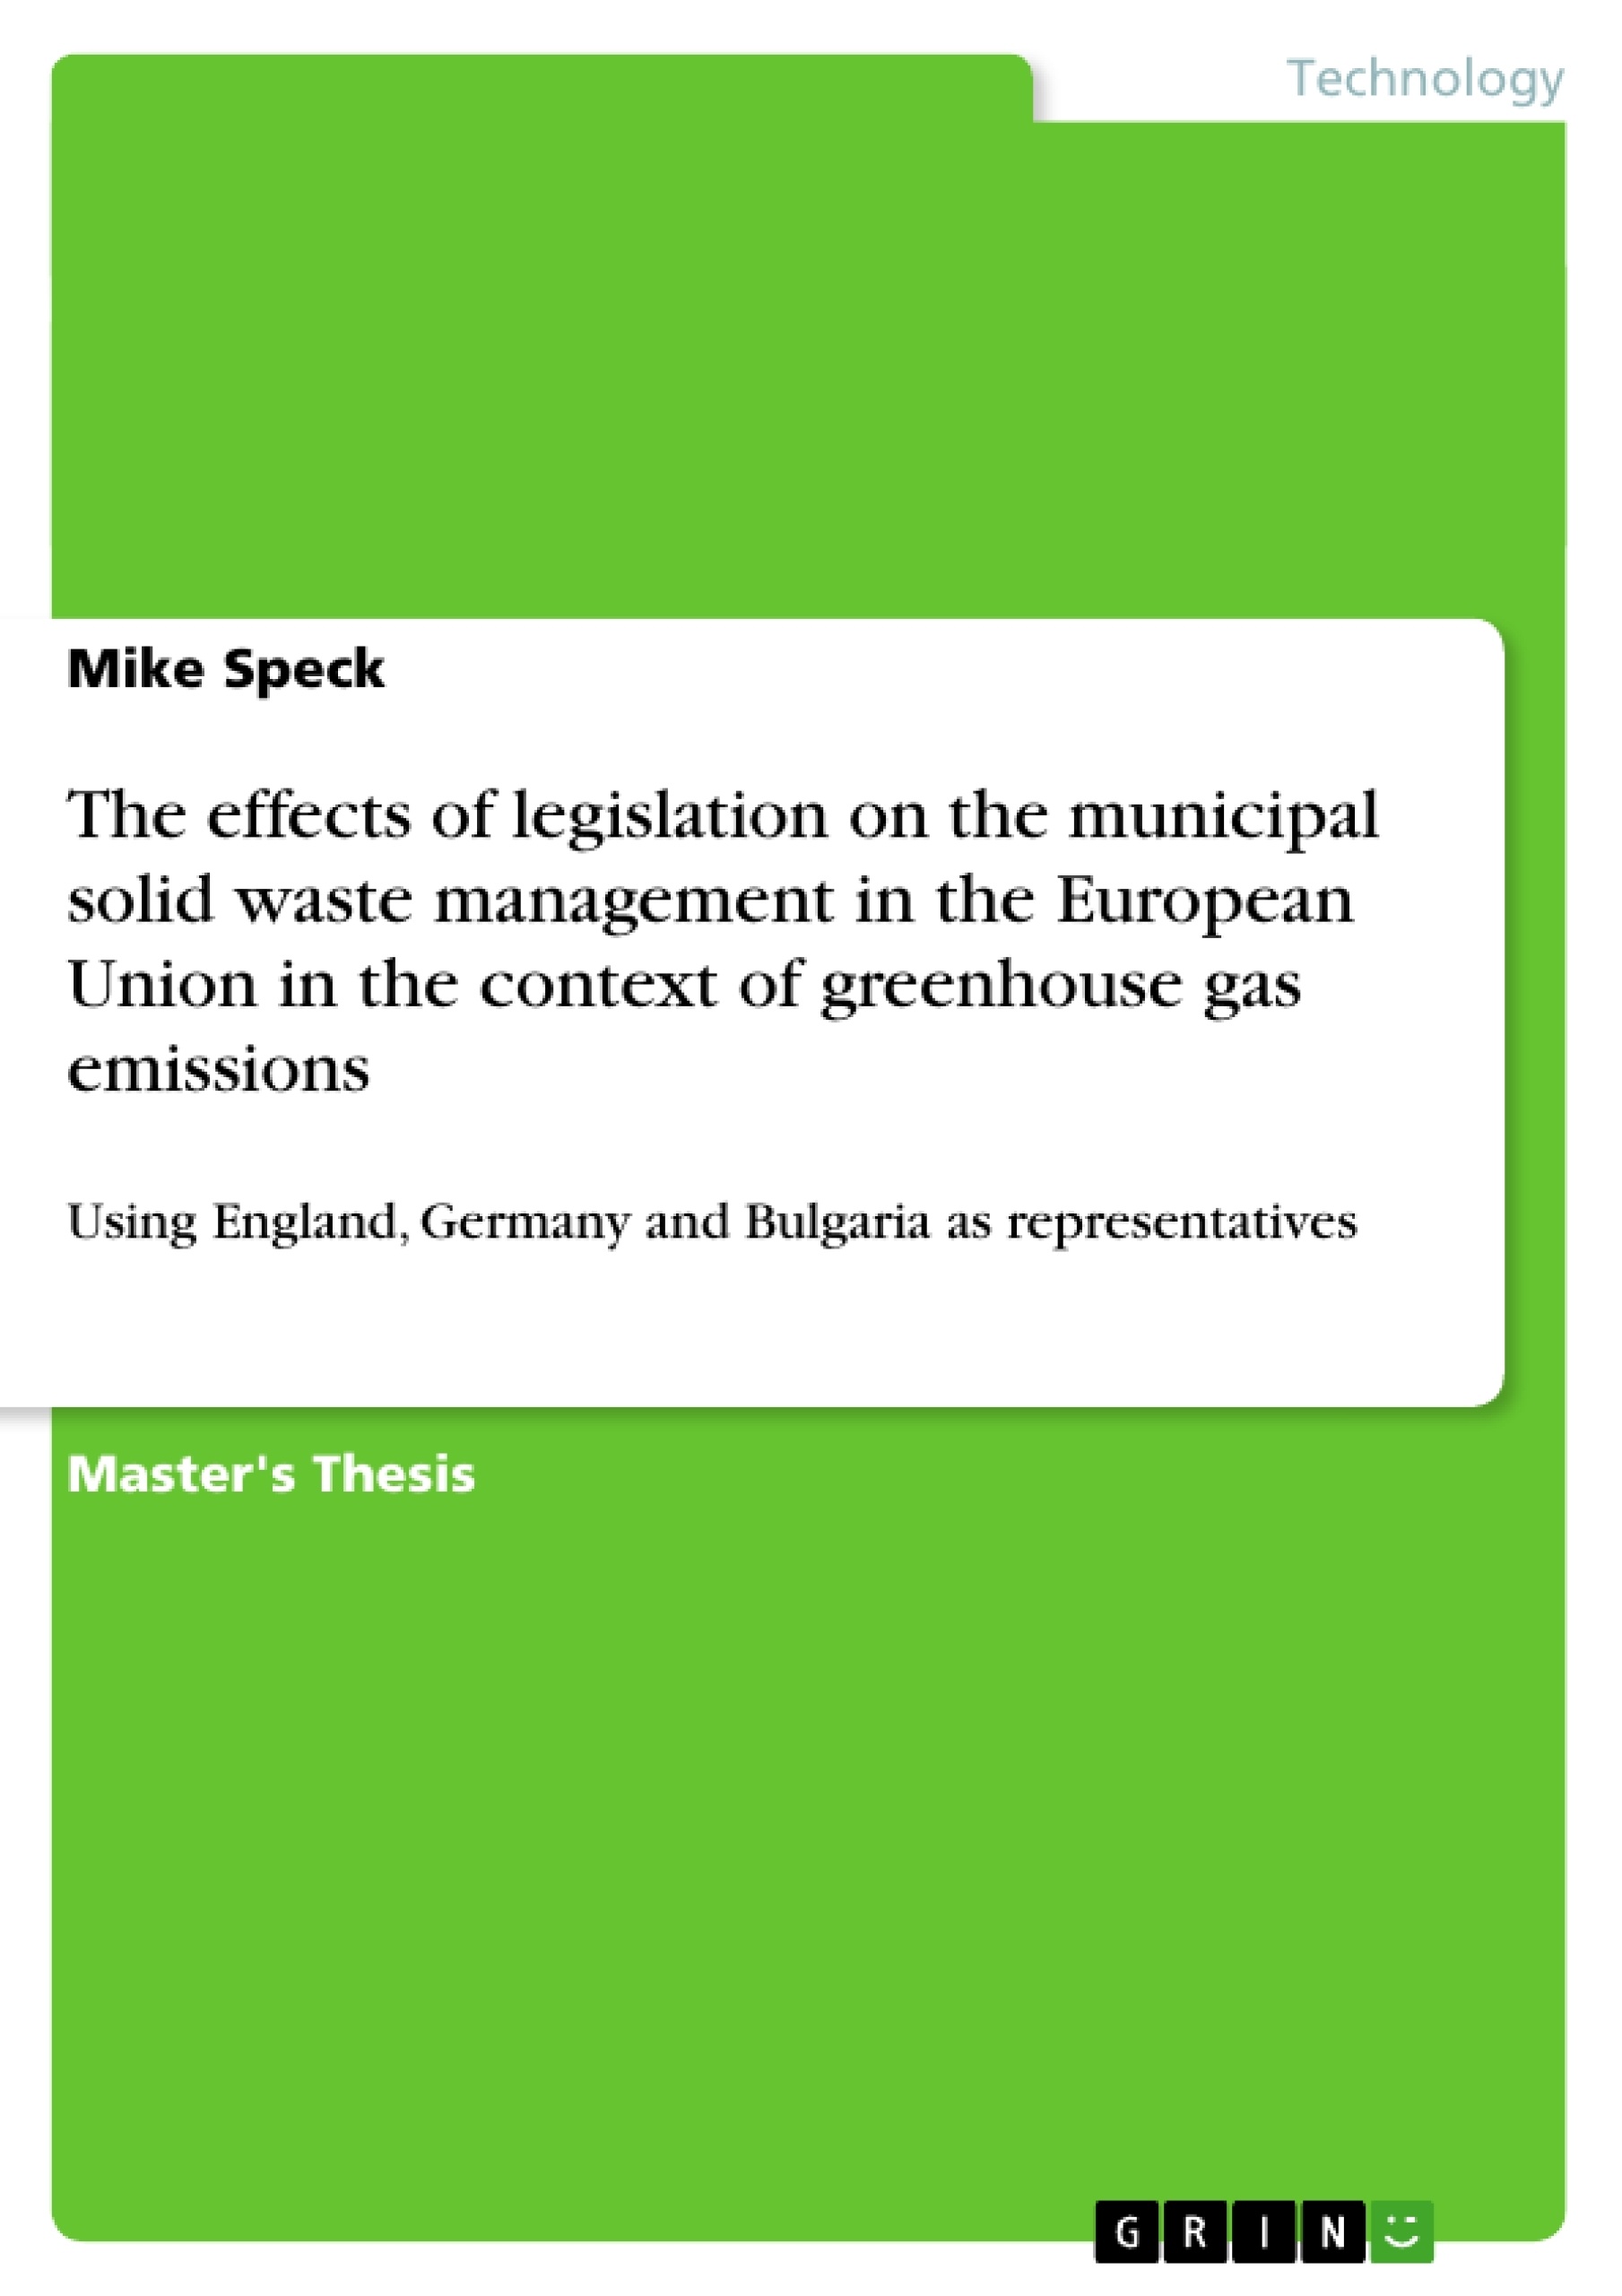 Title: The effects of legislation on the municipal solid waste management in the European Union in the context of greenhouse gas emissions